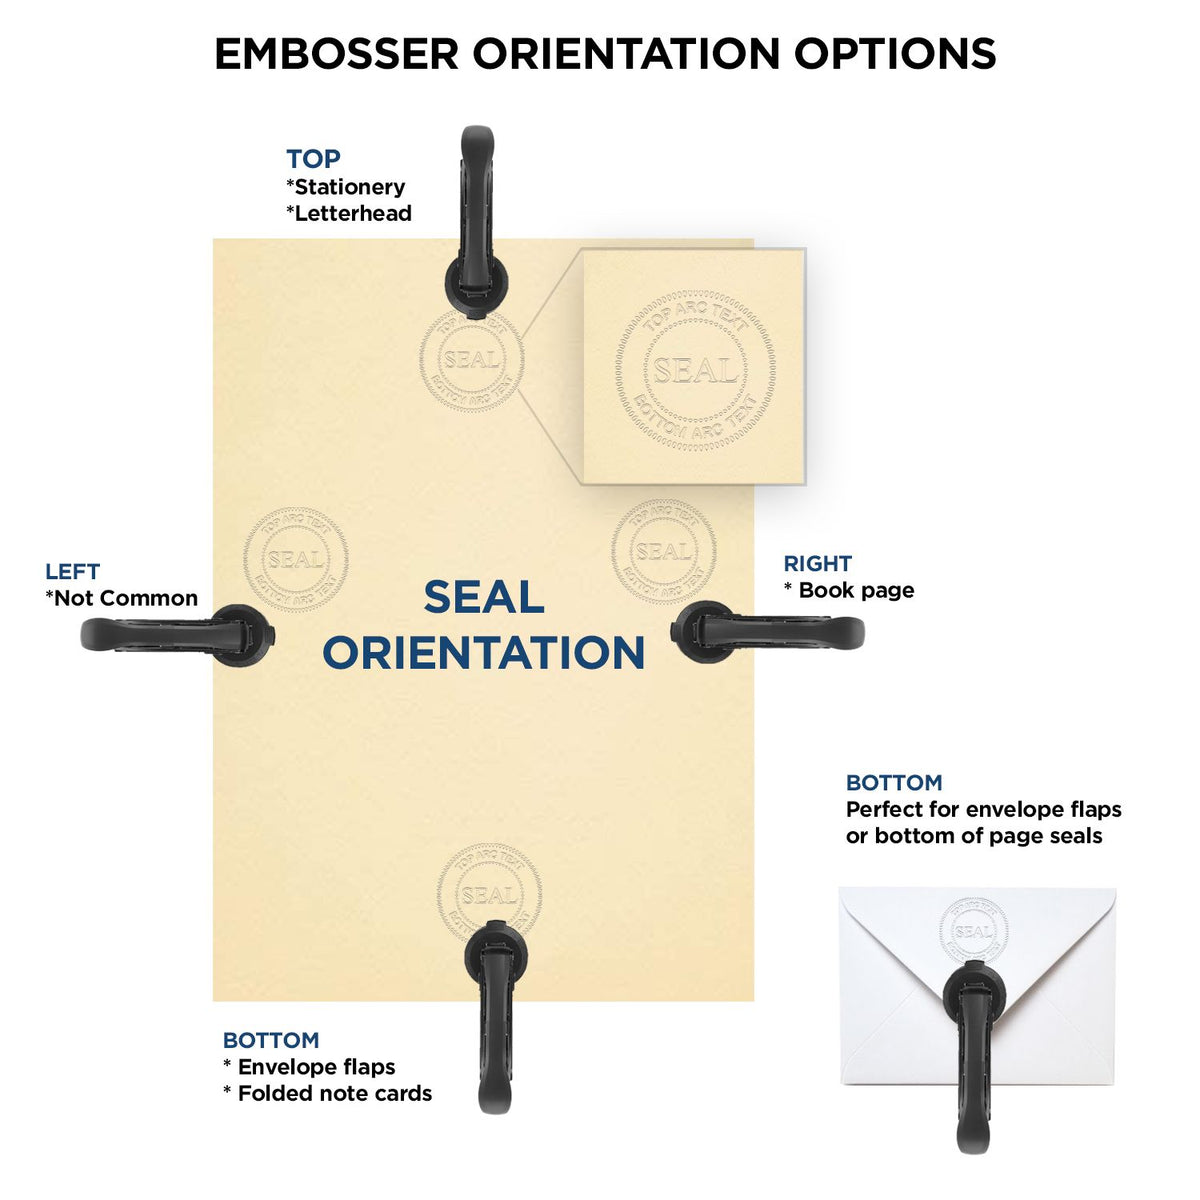 An infographic for the Heavy Duty Cast Iron Alaska Geologist Seal Embosser showing embosser orientation, this is showing examples of a top, bottom, right and left insert.